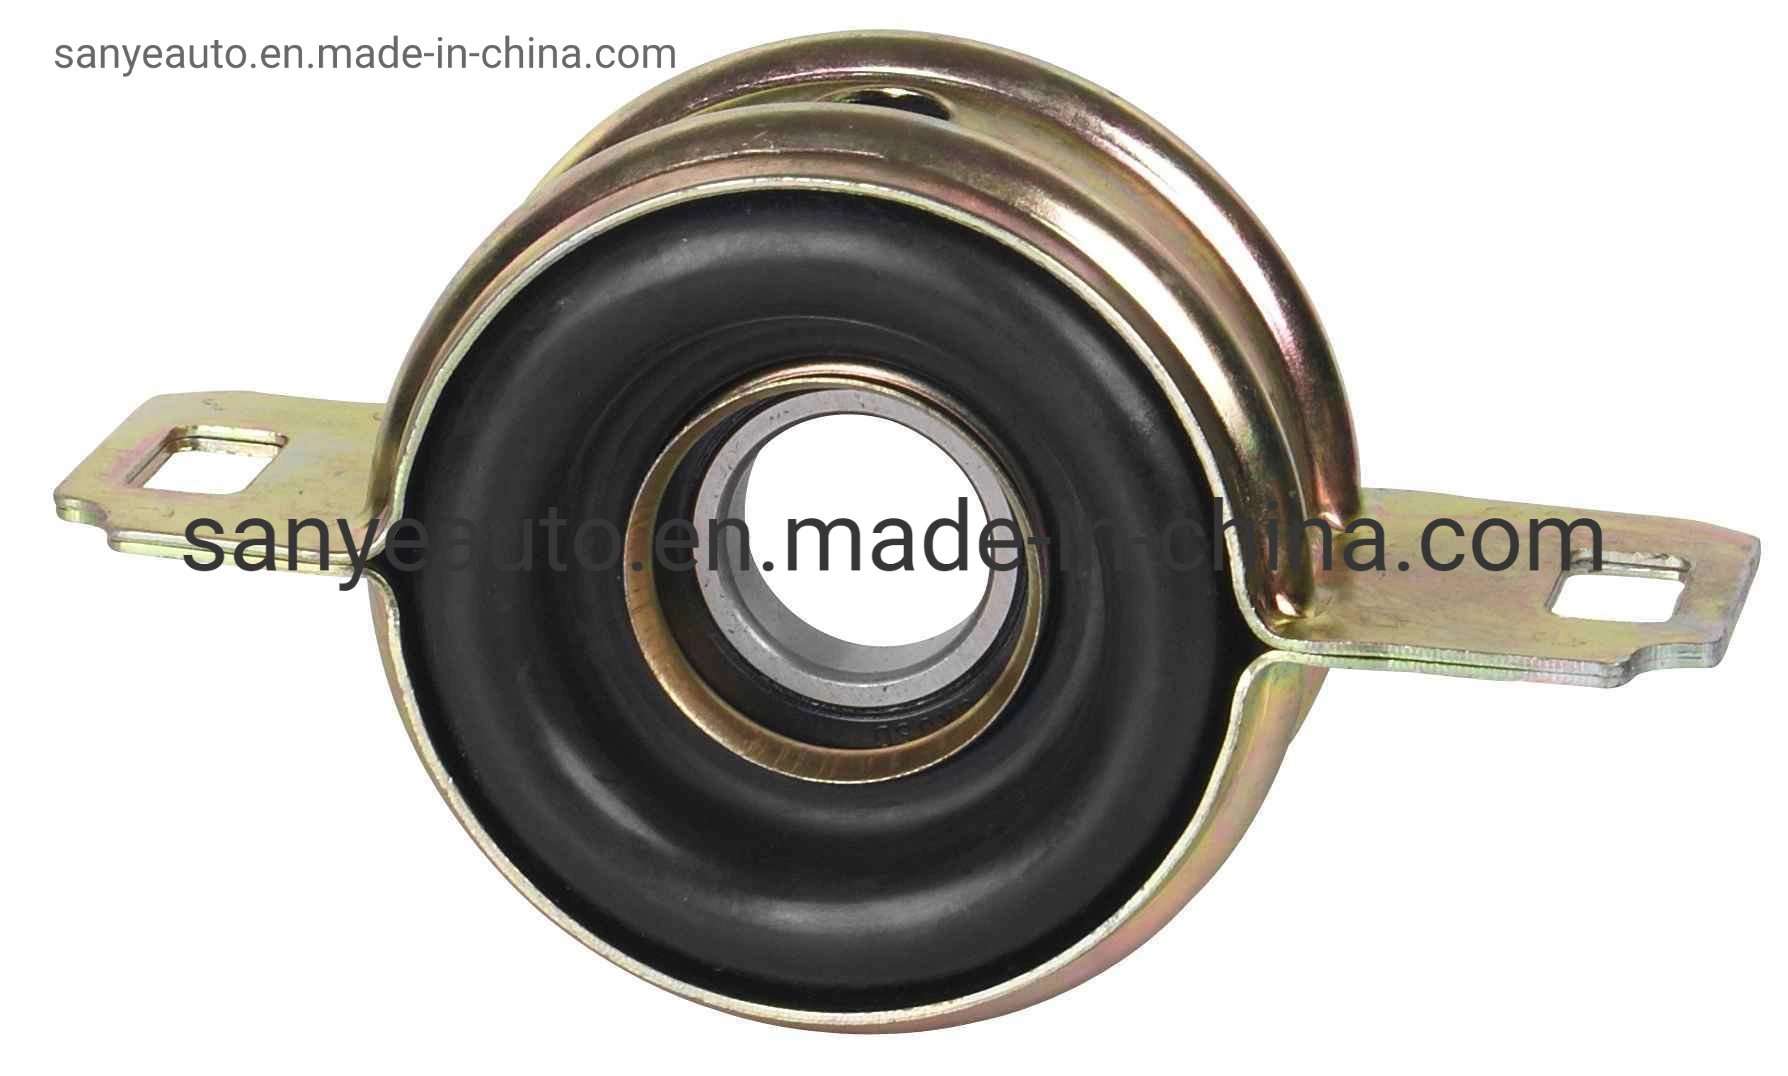 Ap-Jsw Brand High quality/High cost performance 37230-22140 for Toyota Center Bearing